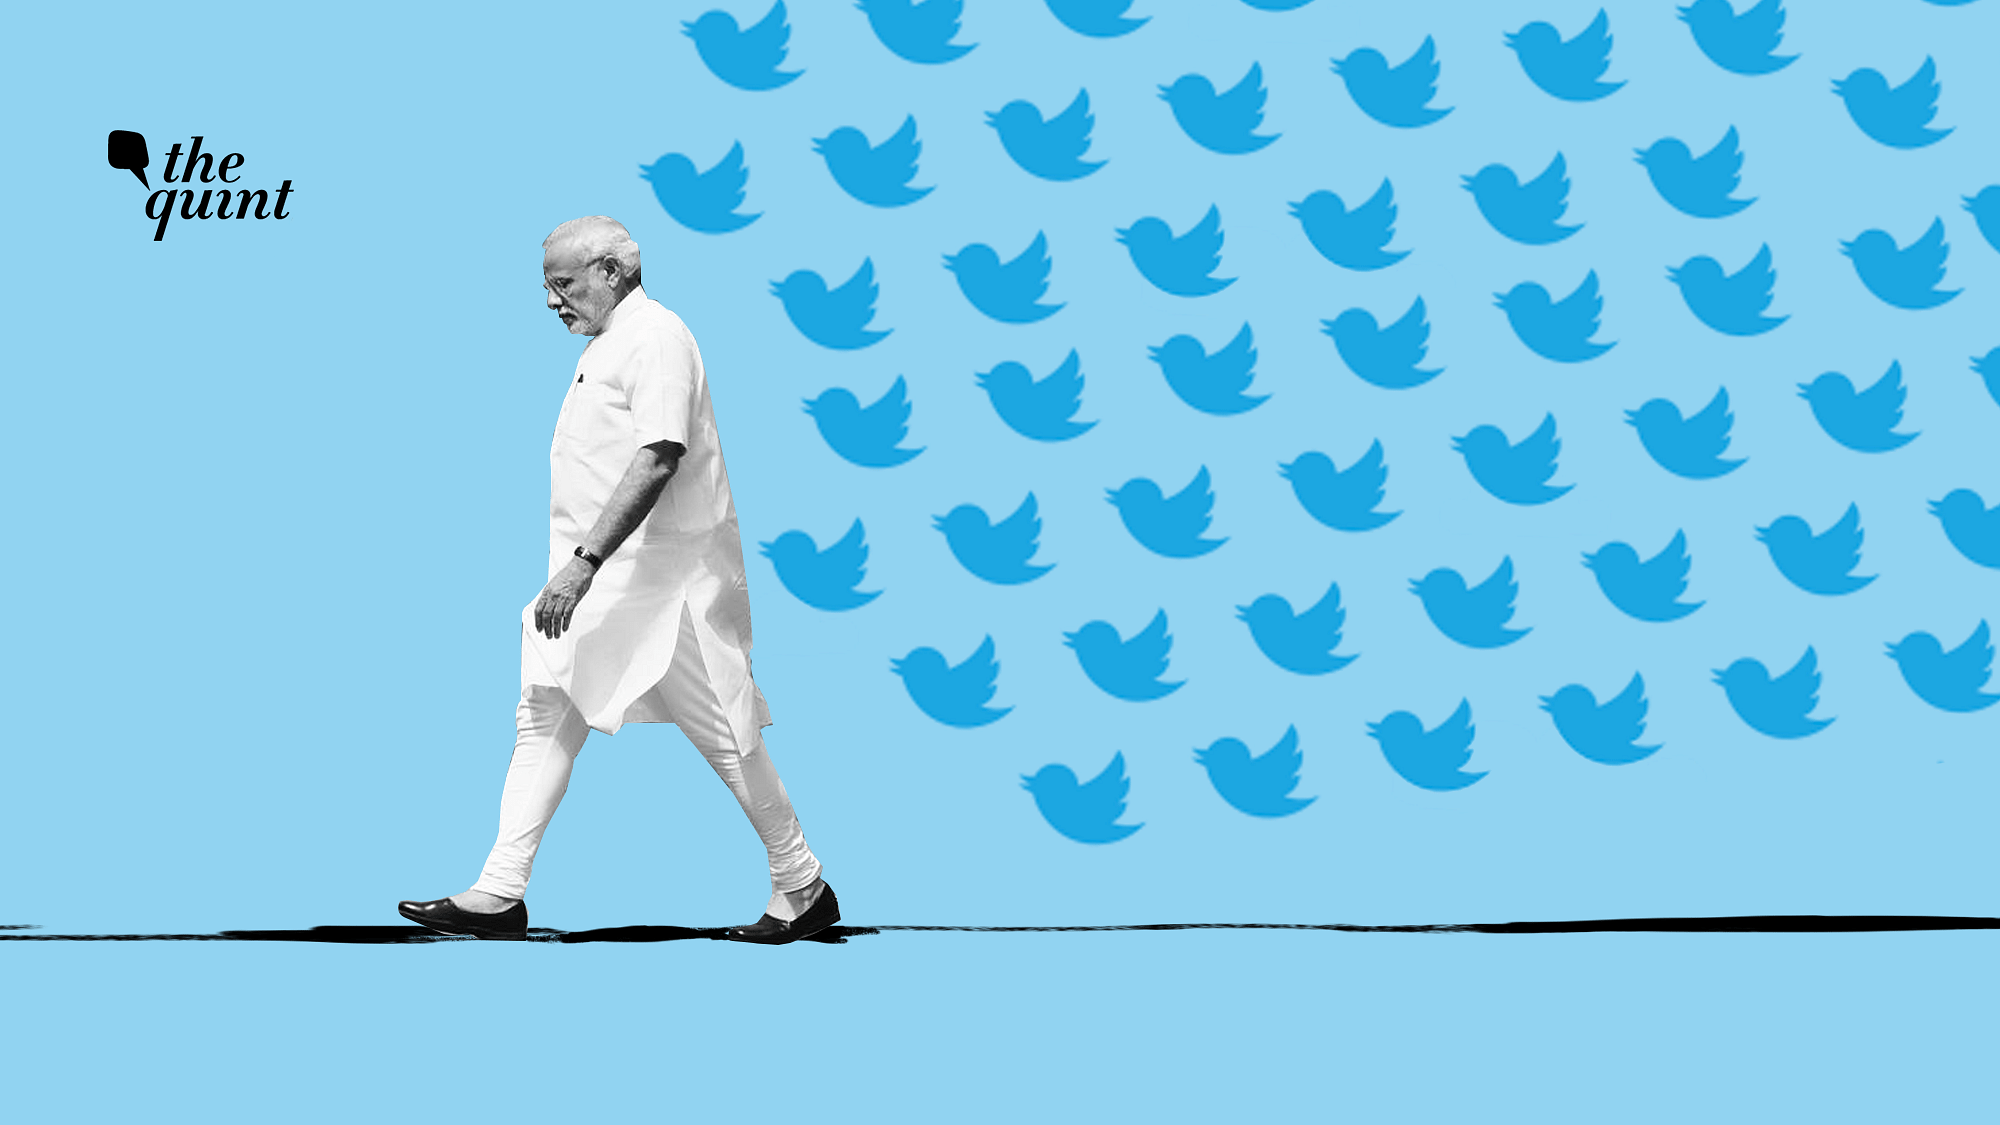 PM Modi has encountered persistent criticism for following individuals on Twitter who have trolled, attacked and abused women.